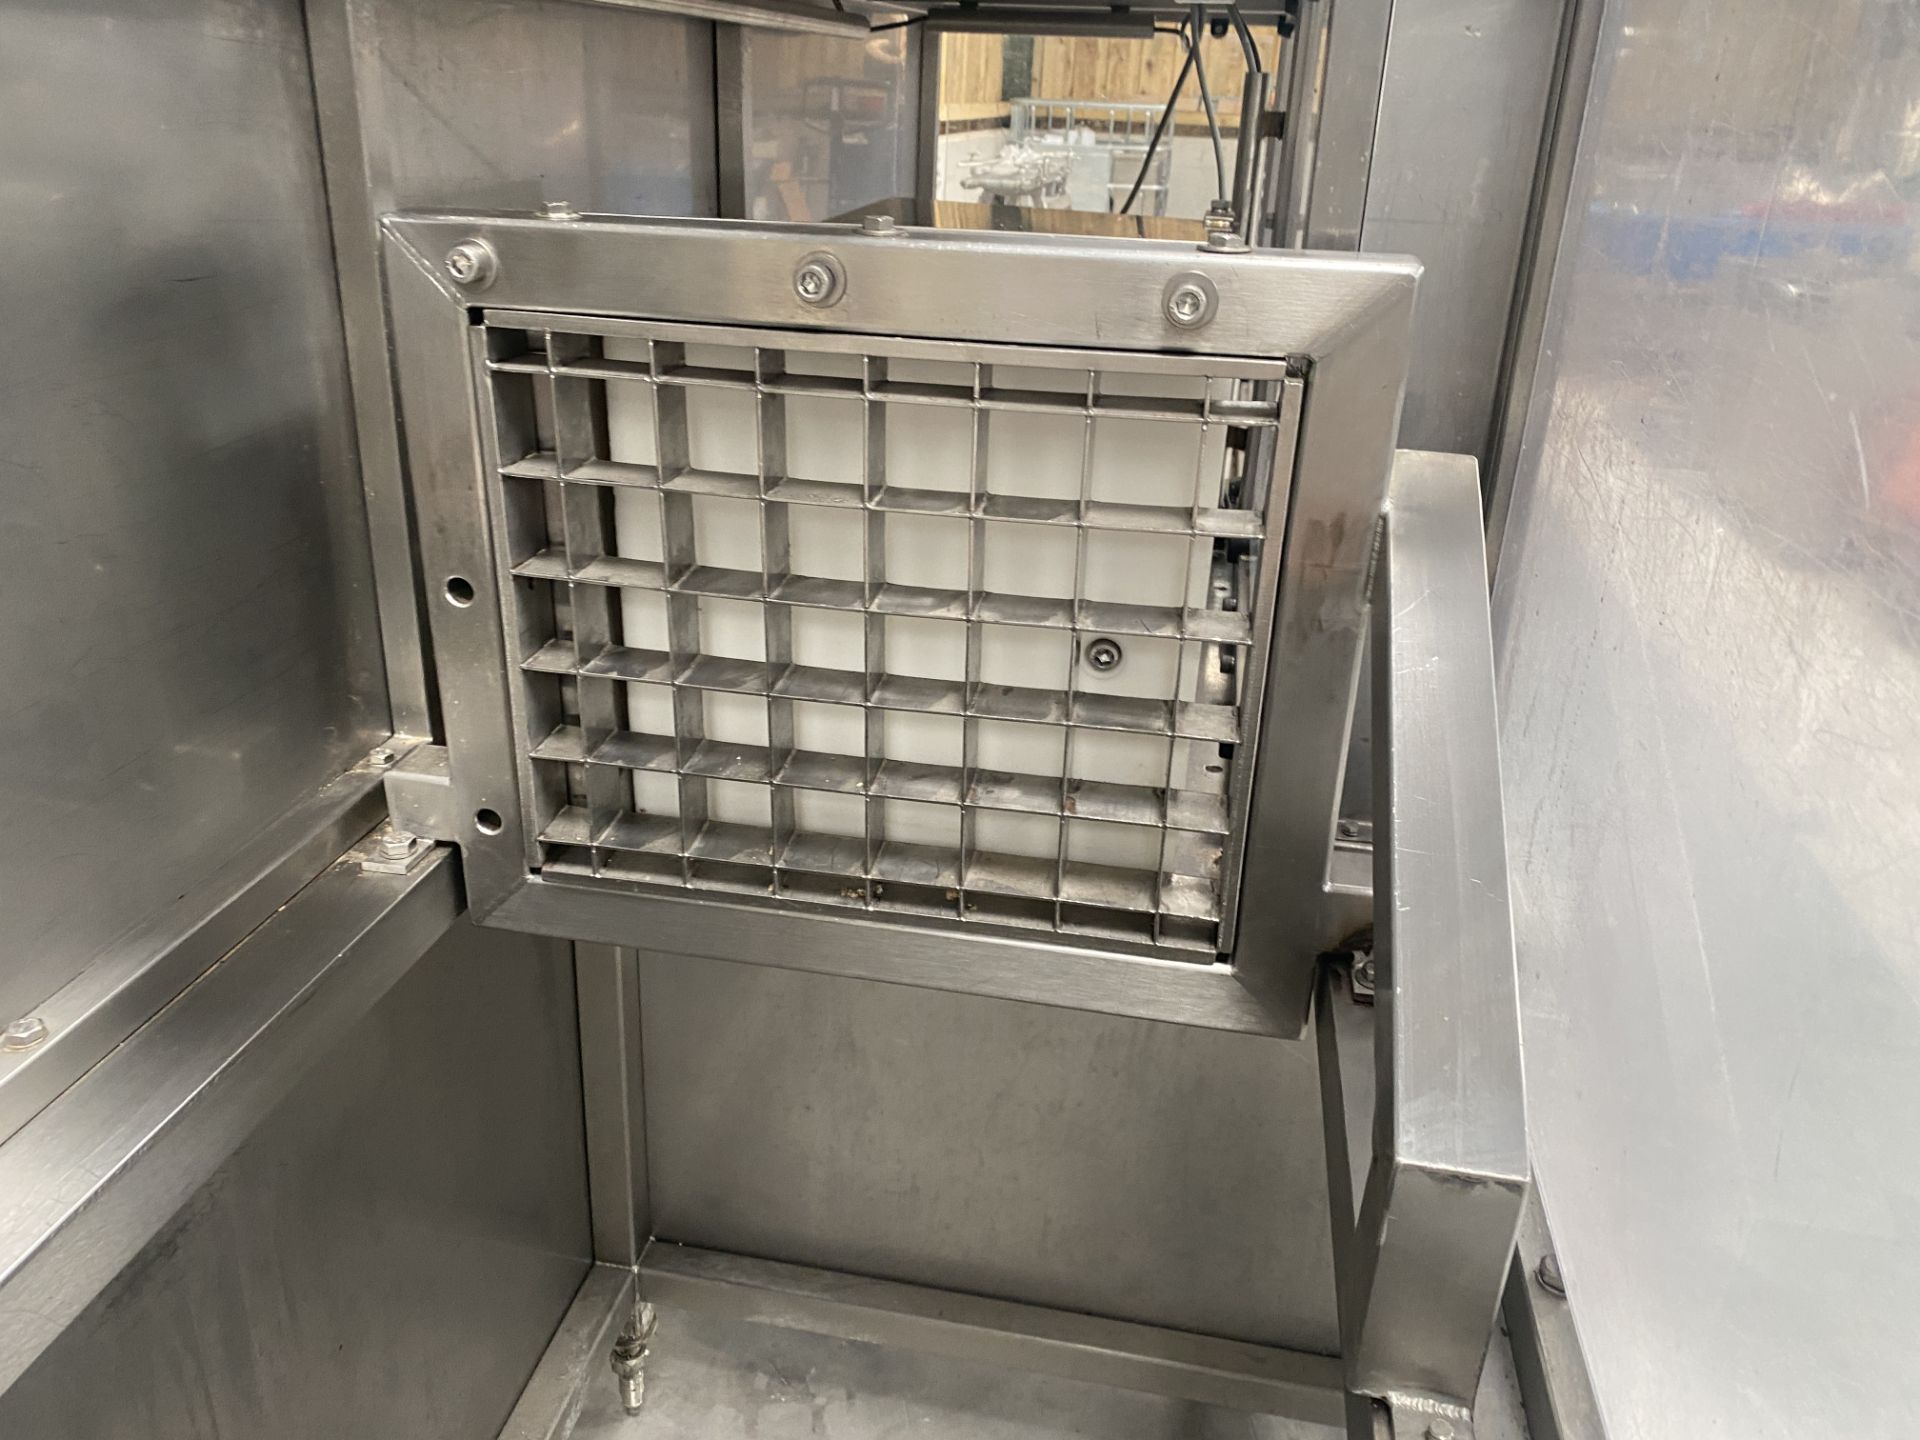 SINGLE STATION CHEESE / BUTTER CUTTER. - Image 7 of 7